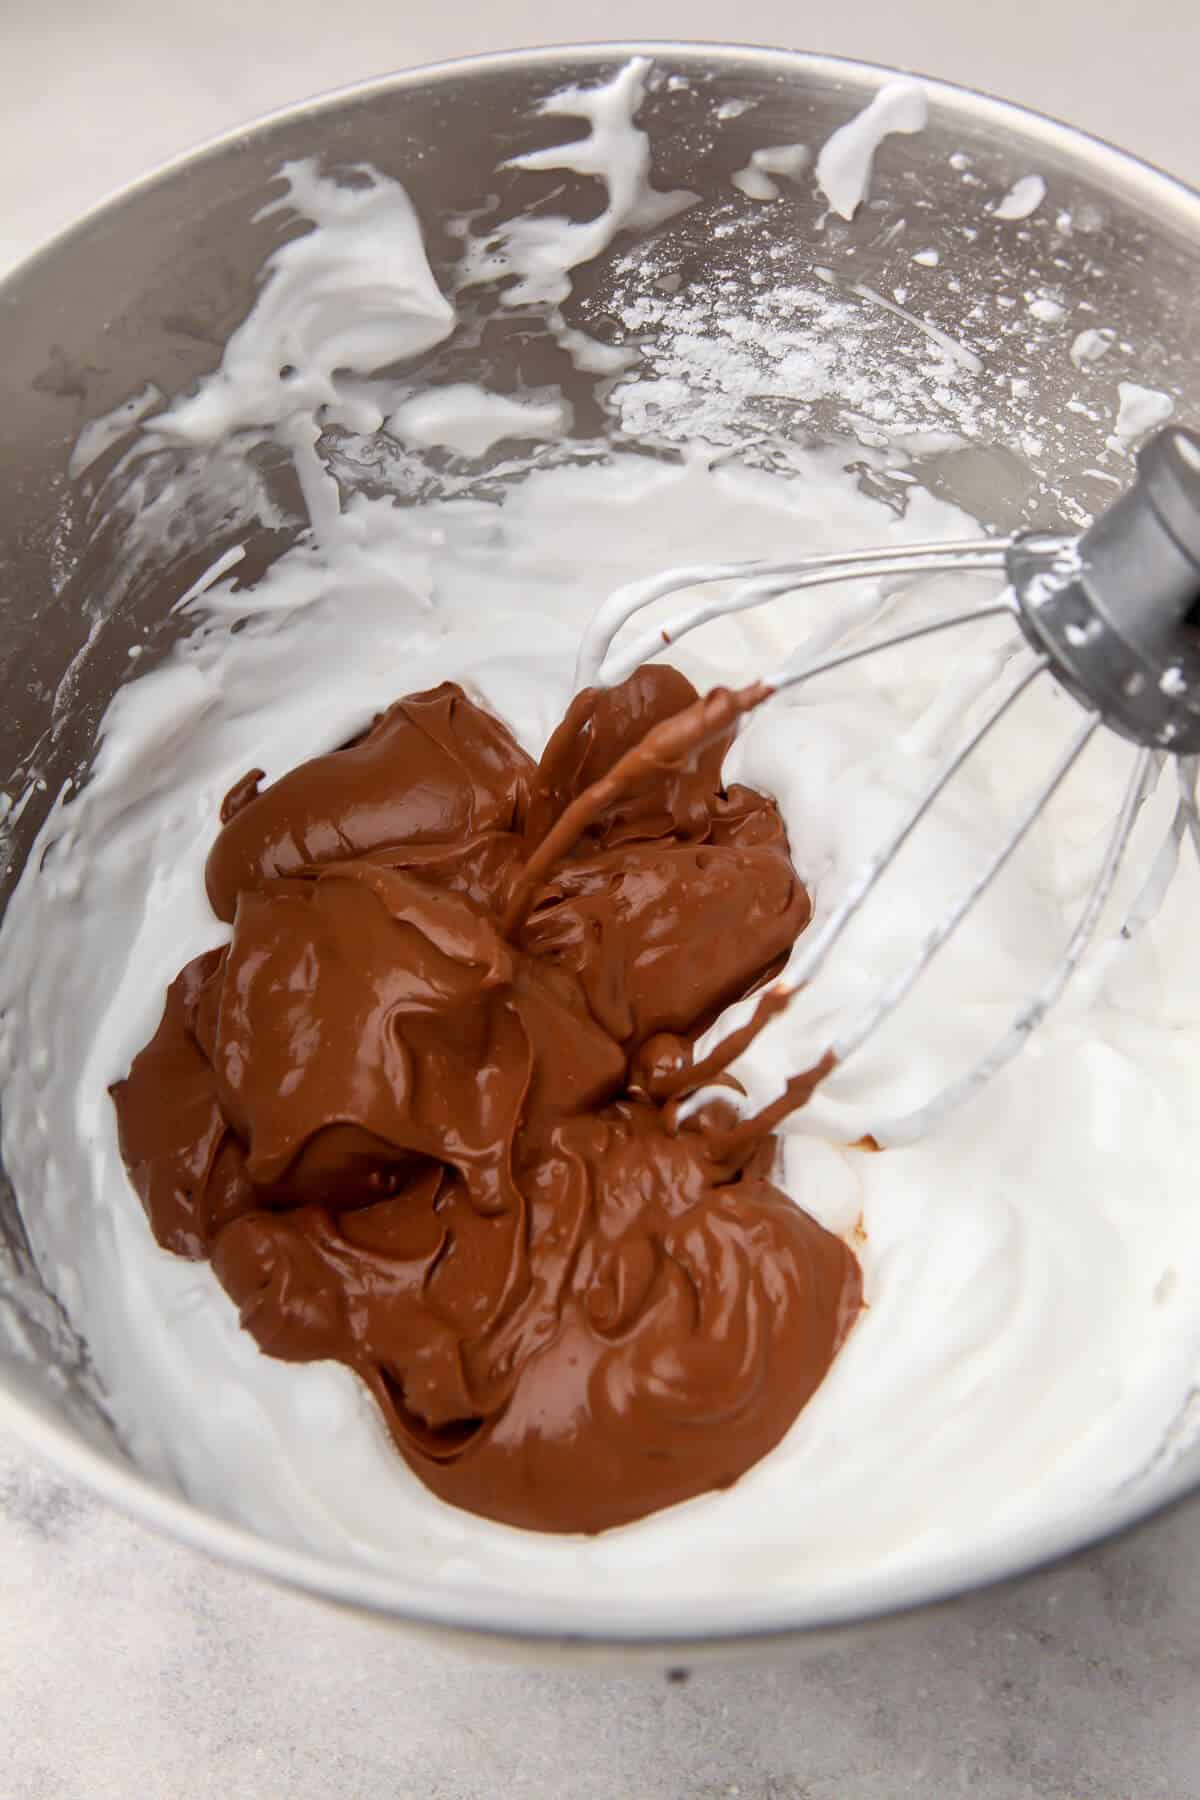 Blended chocolate being added to aquafaba to make vegan chocolate mousse.